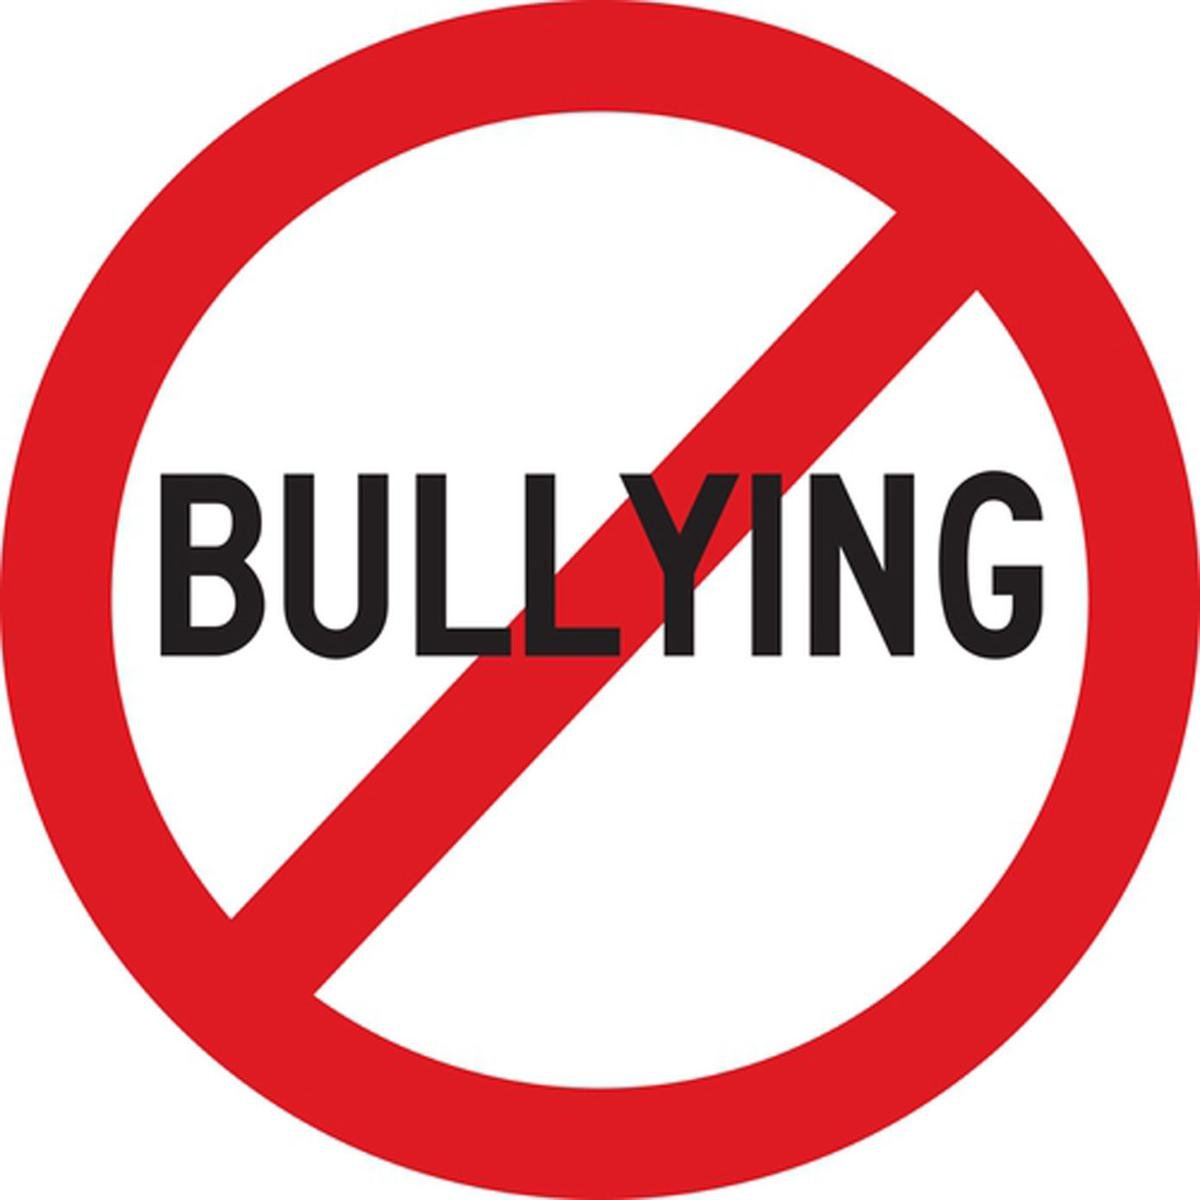 EDITORIAL: We're too good to let bullying continue in our schools